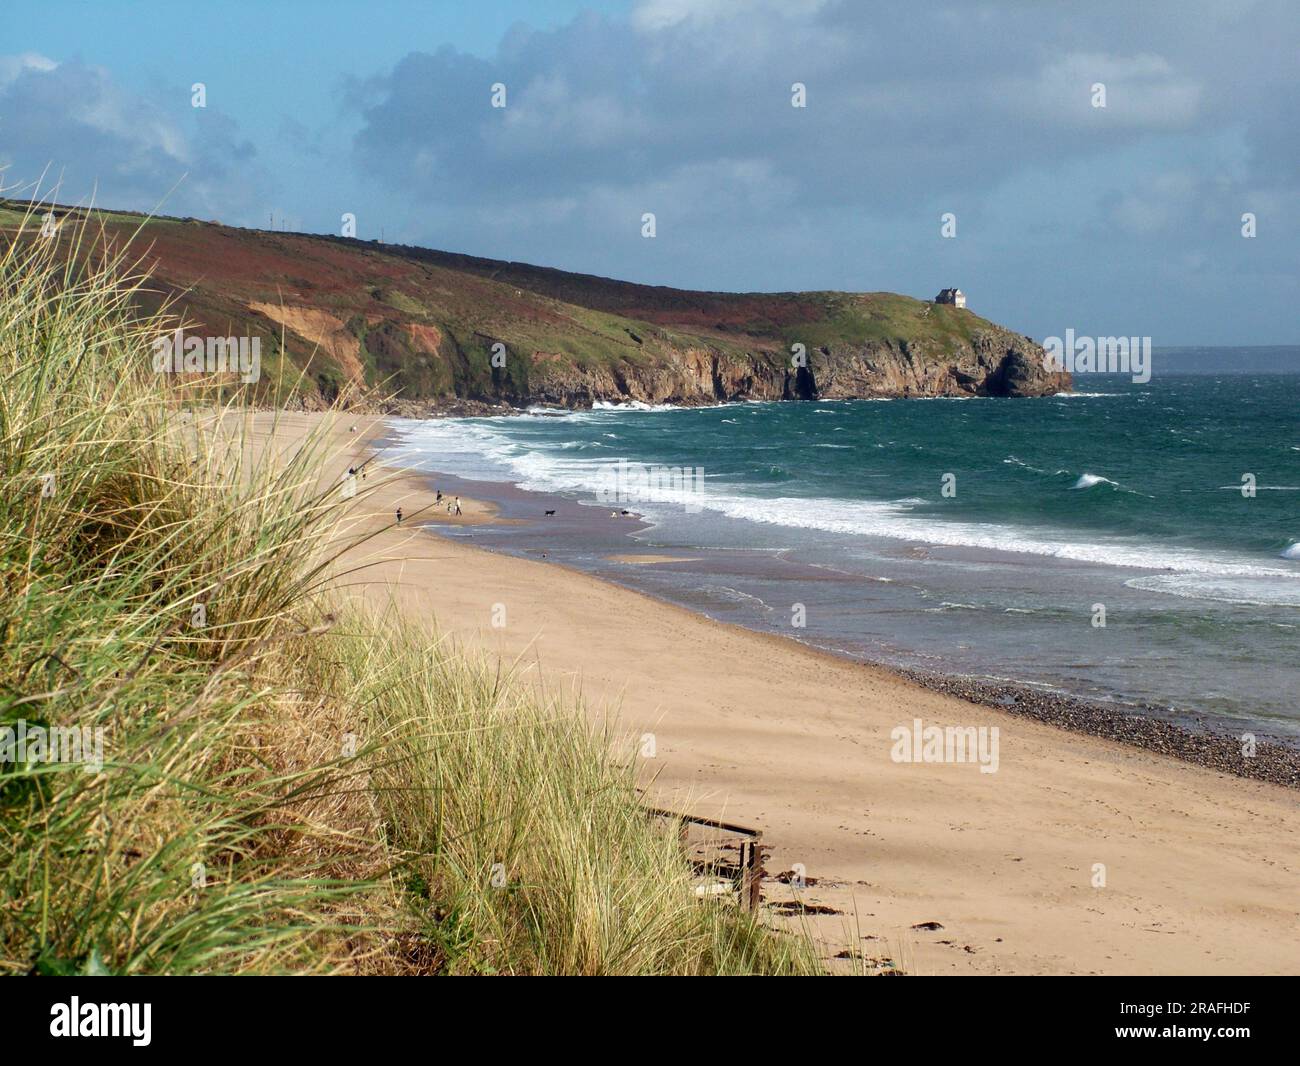 Bright autumn sunshine lights up the Cornish coast at Praa sands.The view over the grass, sand and cliffs to the house on Rinsey Head with the waves i Stock Photo